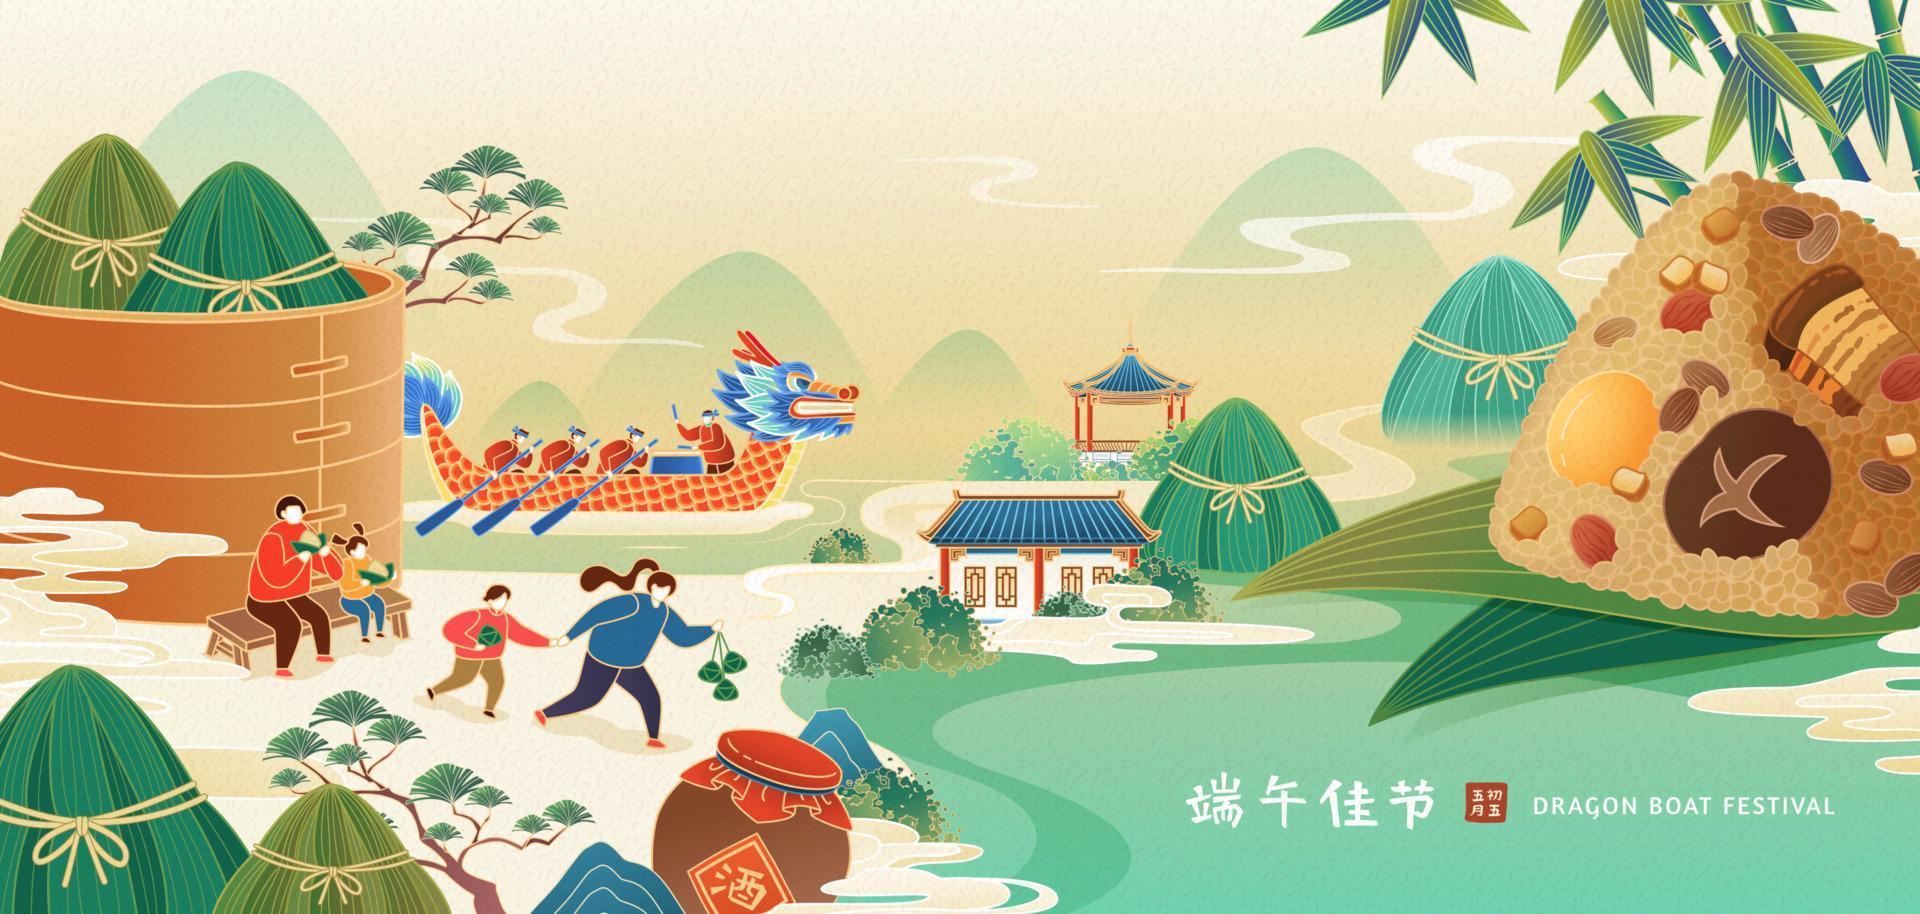 Faceless people enjoying traditional Duanwu activities, such as eating zongzi and rowing dragon boat. Holiday greeting written in Chinese. vector